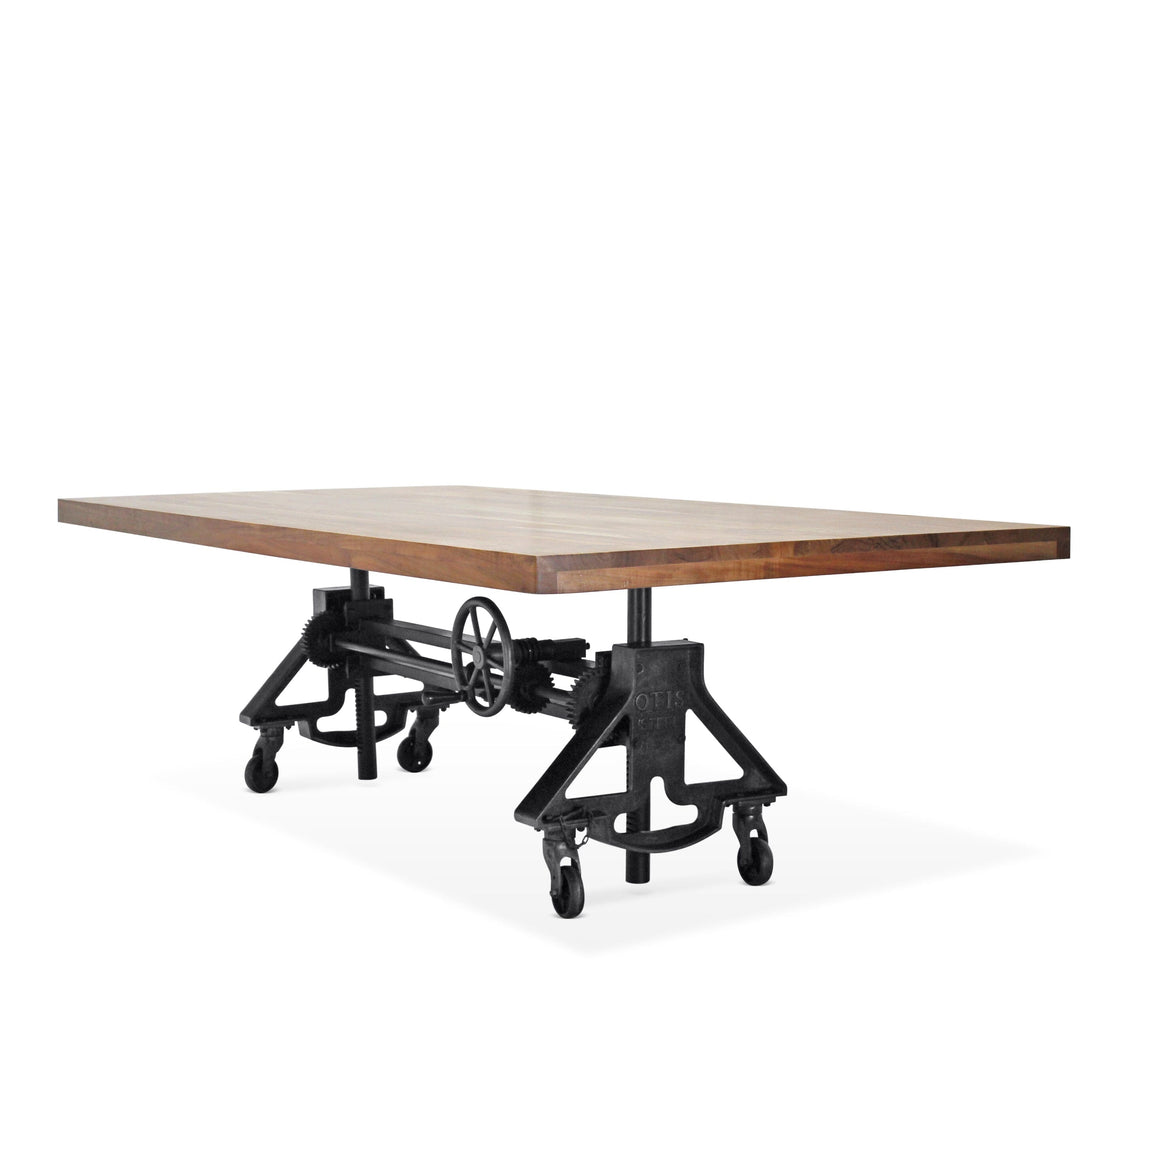 Otis Steel Dining Table - Adjustable Height - Iron Base - Casters - Natural Dining Table Rustic Deco